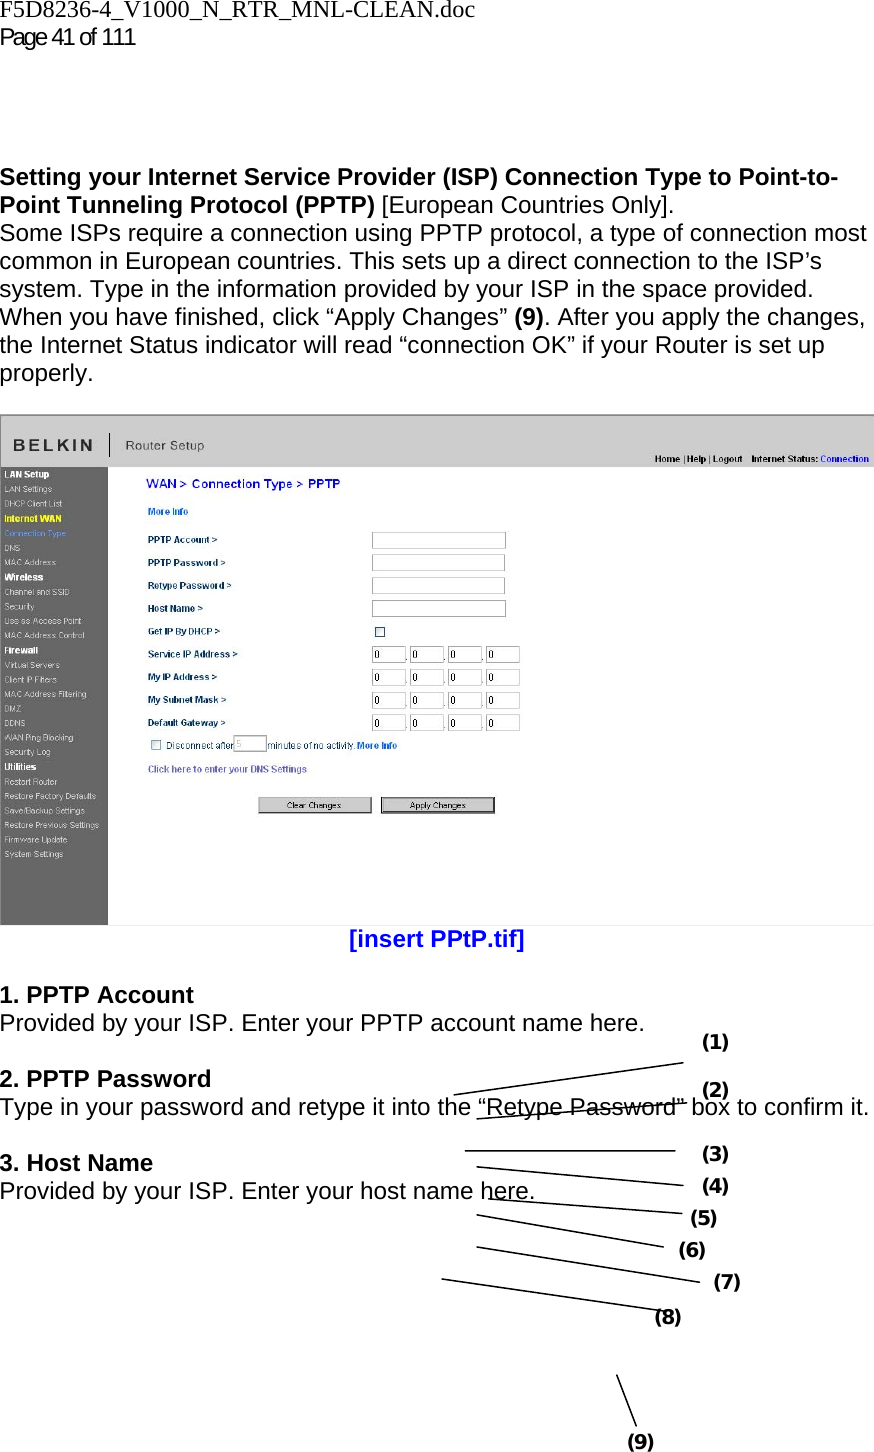 F5D8236-4_V1000_N_RTR_MNL-CLEAN.doc  Page 41 of 111      Setting your Internet Service Provider (ISP) Connection Type to Point-to-Point Tunneling Protocol (PPTP) [European Countries Only].  Some ISPs require a connection using PPTP protocol, a type of connection most common in European countries. This sets up a direct connection to the ISP’s system. Type in the information provided by your ISP in the space provided. When you have finished, click “Apply Changes” (9). After you apply the changes, the Internet Status indicator will read “connection OK” if your Router is set up properly.   [insert PPtP.tif]  1. PPTP Account Provided by your ISP. Enter your PPTP account name here.  2. PPTP Password Type in your password and retype it into the “Retype Password” box to confirm it.  3. Host Name Provided by your ISP. Enter your host name here.(1) (2) (3) (4) (5) (6) (7) (8) (9) 